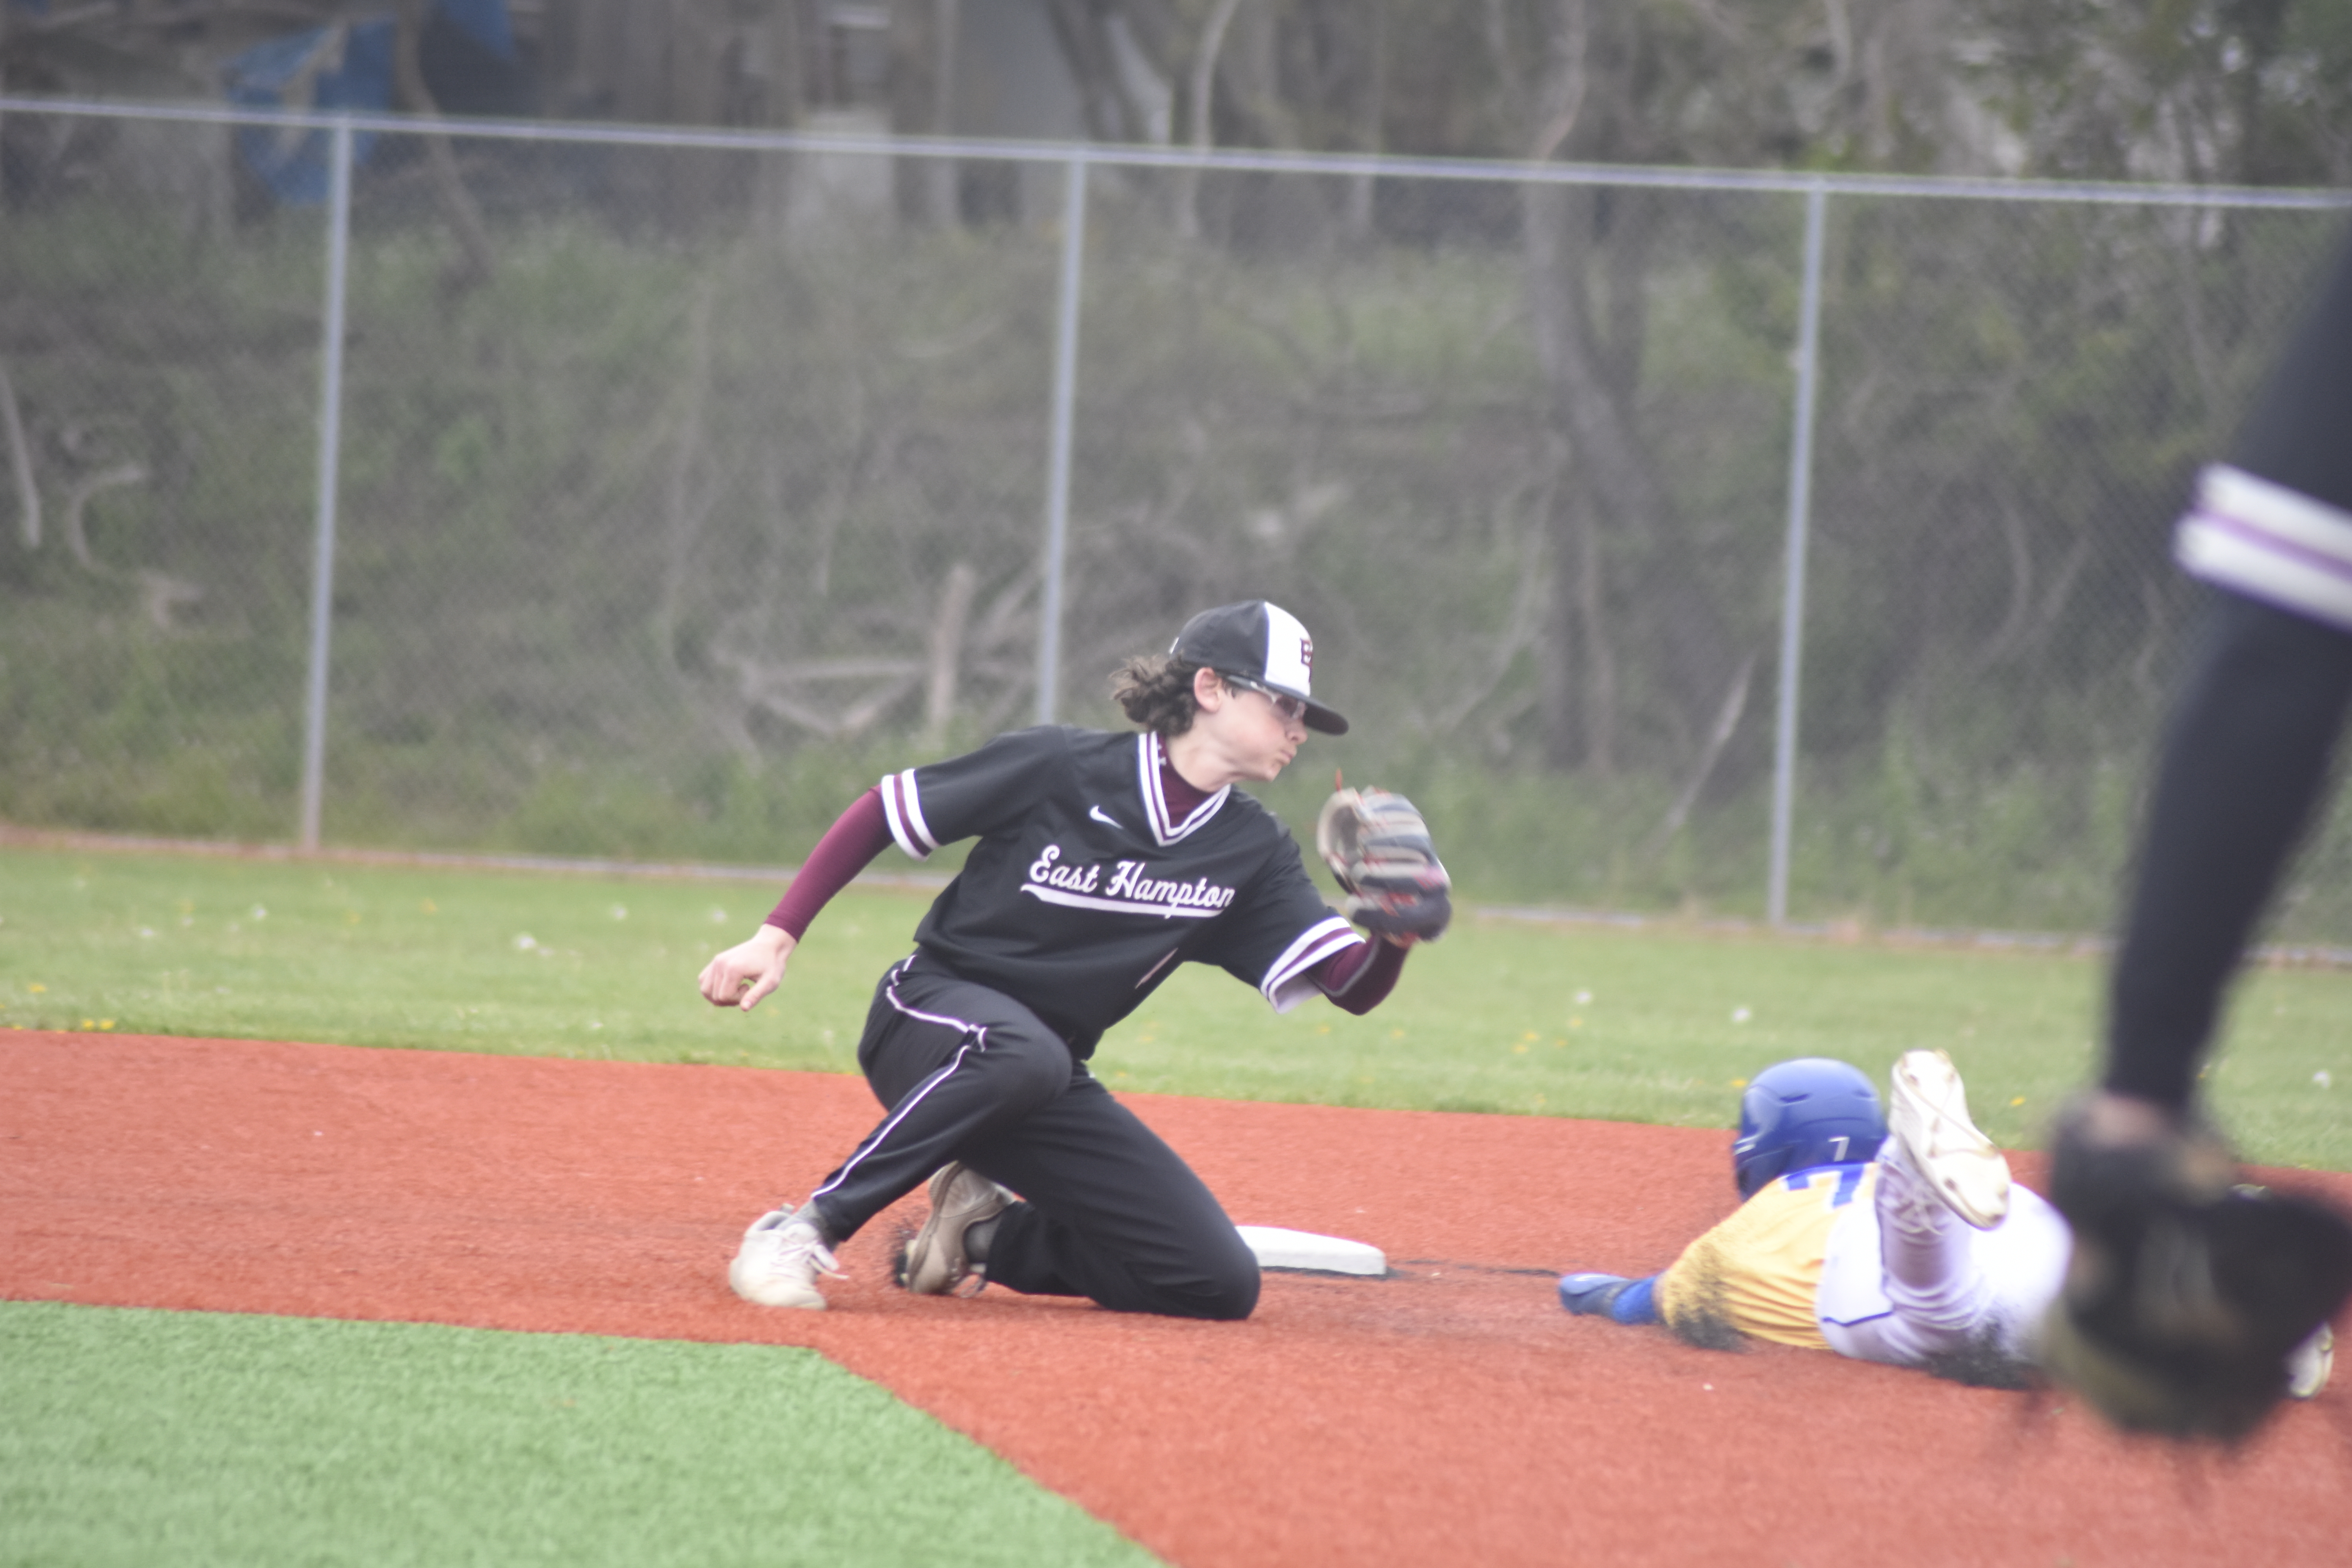 East Hampton shortstop Hudson Meyer tries to tag out a Comsewogue runner trying to steal second base on a close play.   DREW BUDD